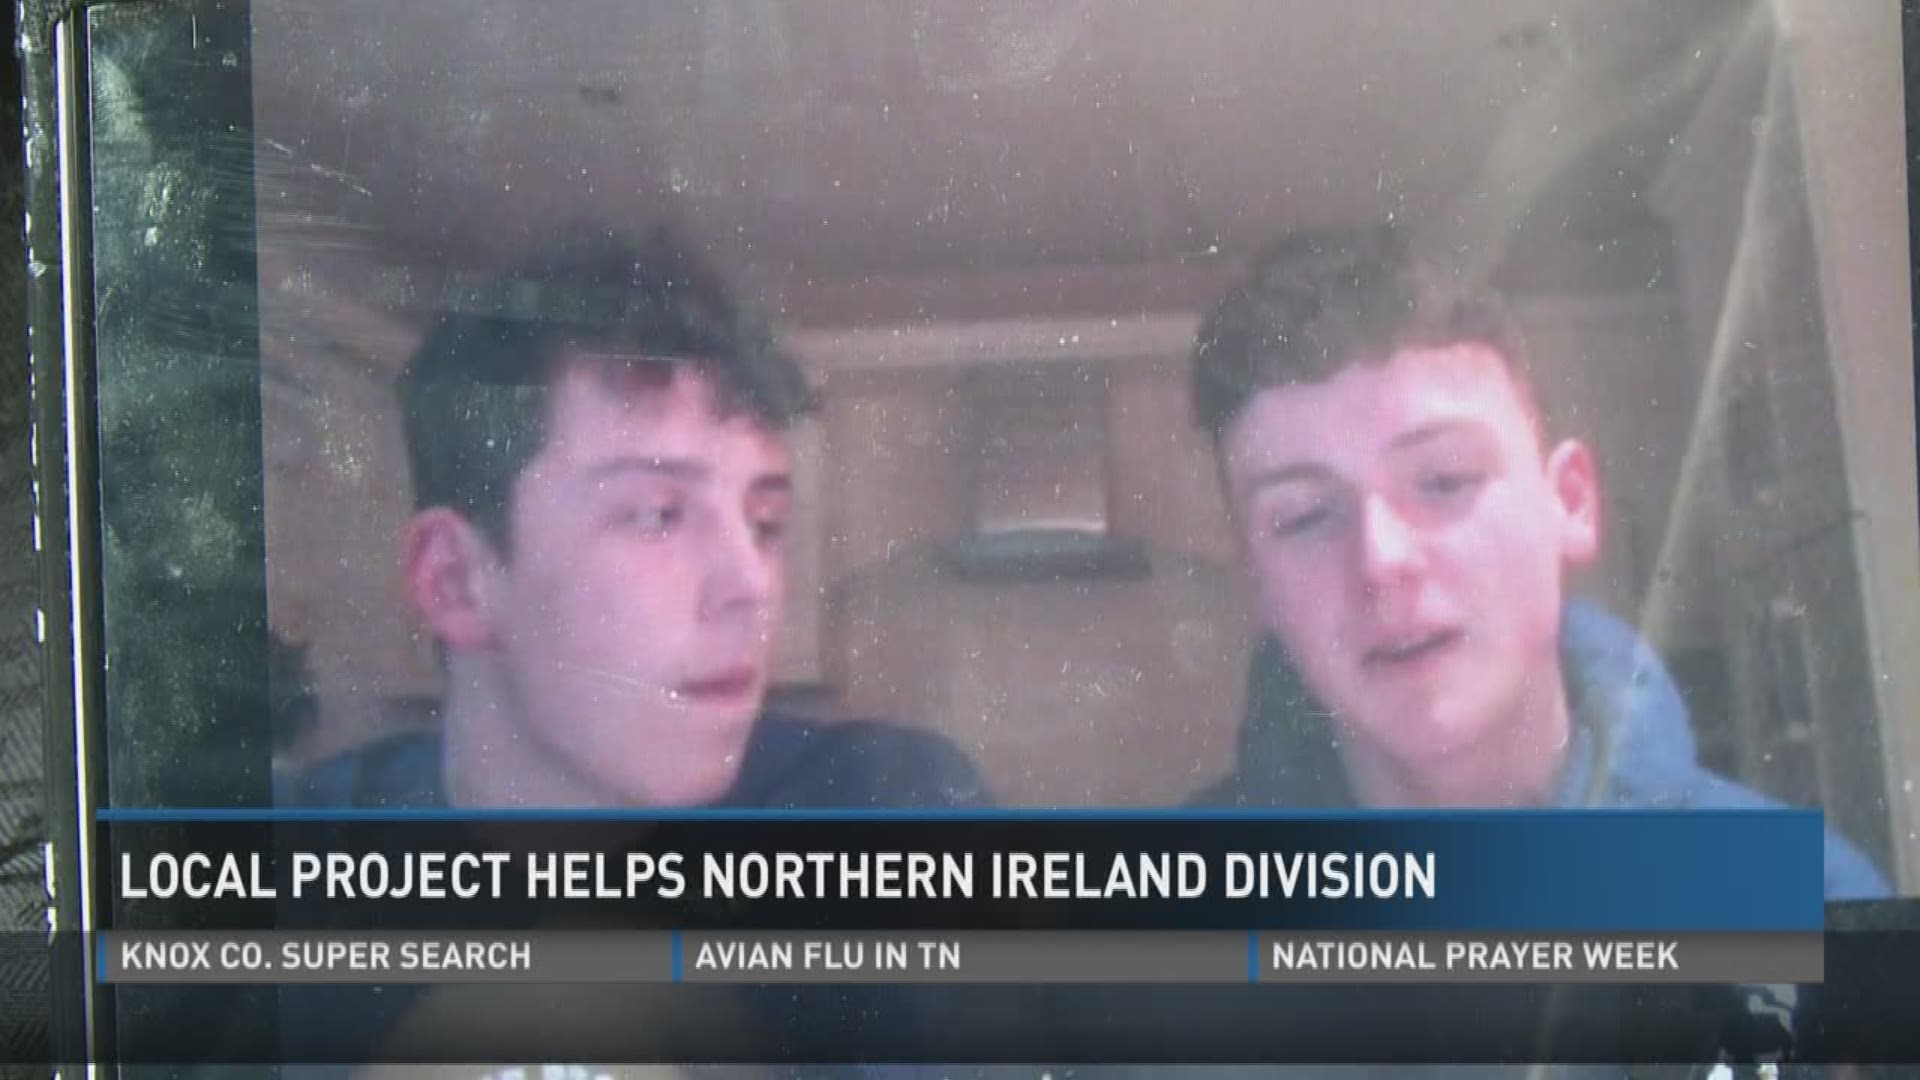 The Ulster Project of East Tennessee brings 30 teenagers from Northern Ireland to America each summer. The teens live with host families and learn about American culture and work to break down barriers between participants of different religions.